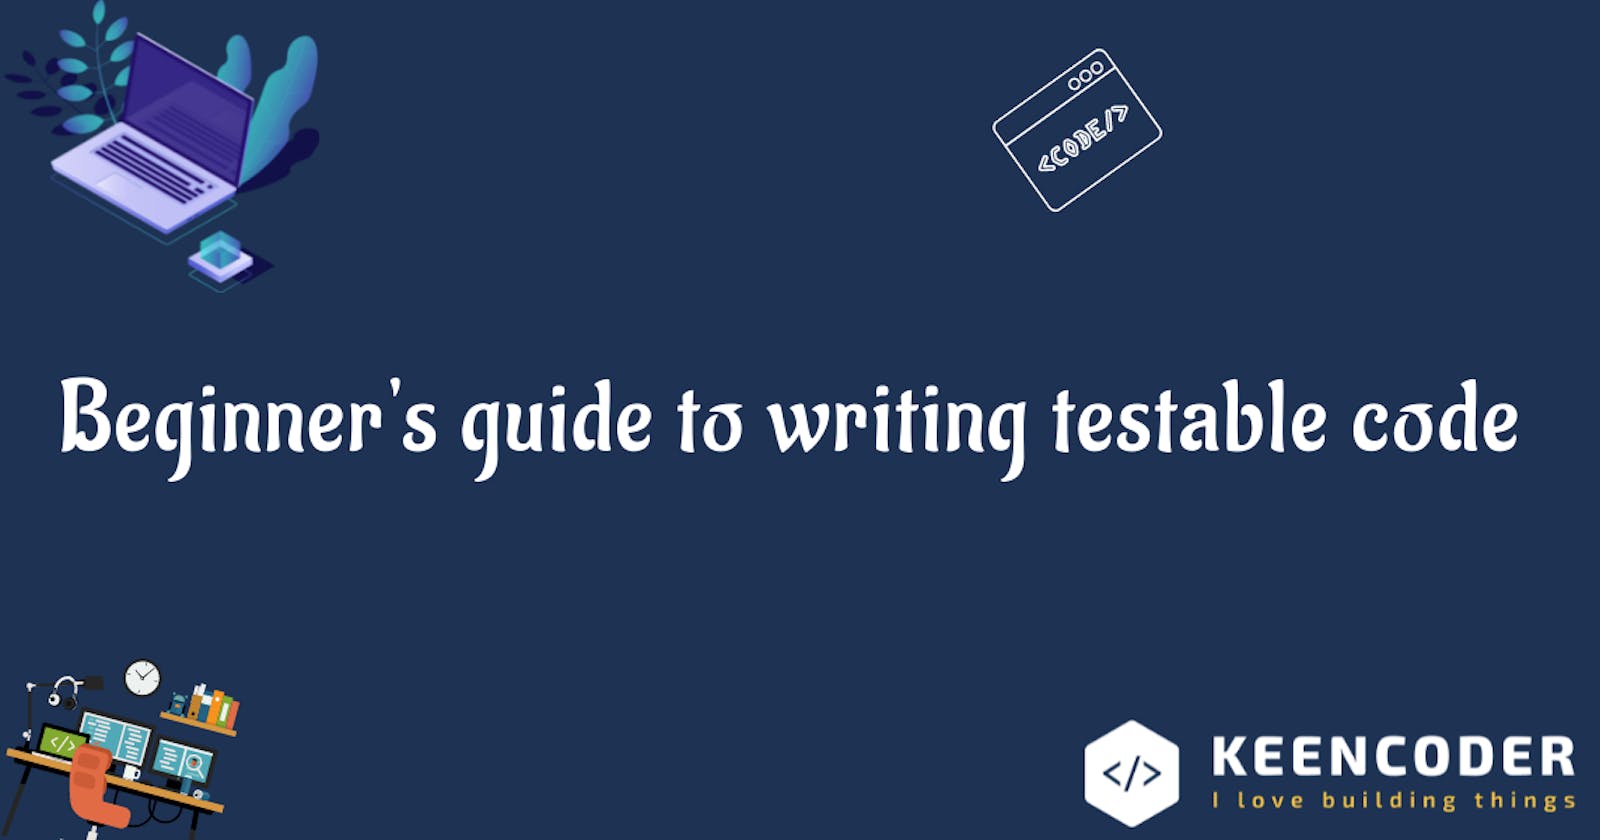 Beginner's guide to writing testable code